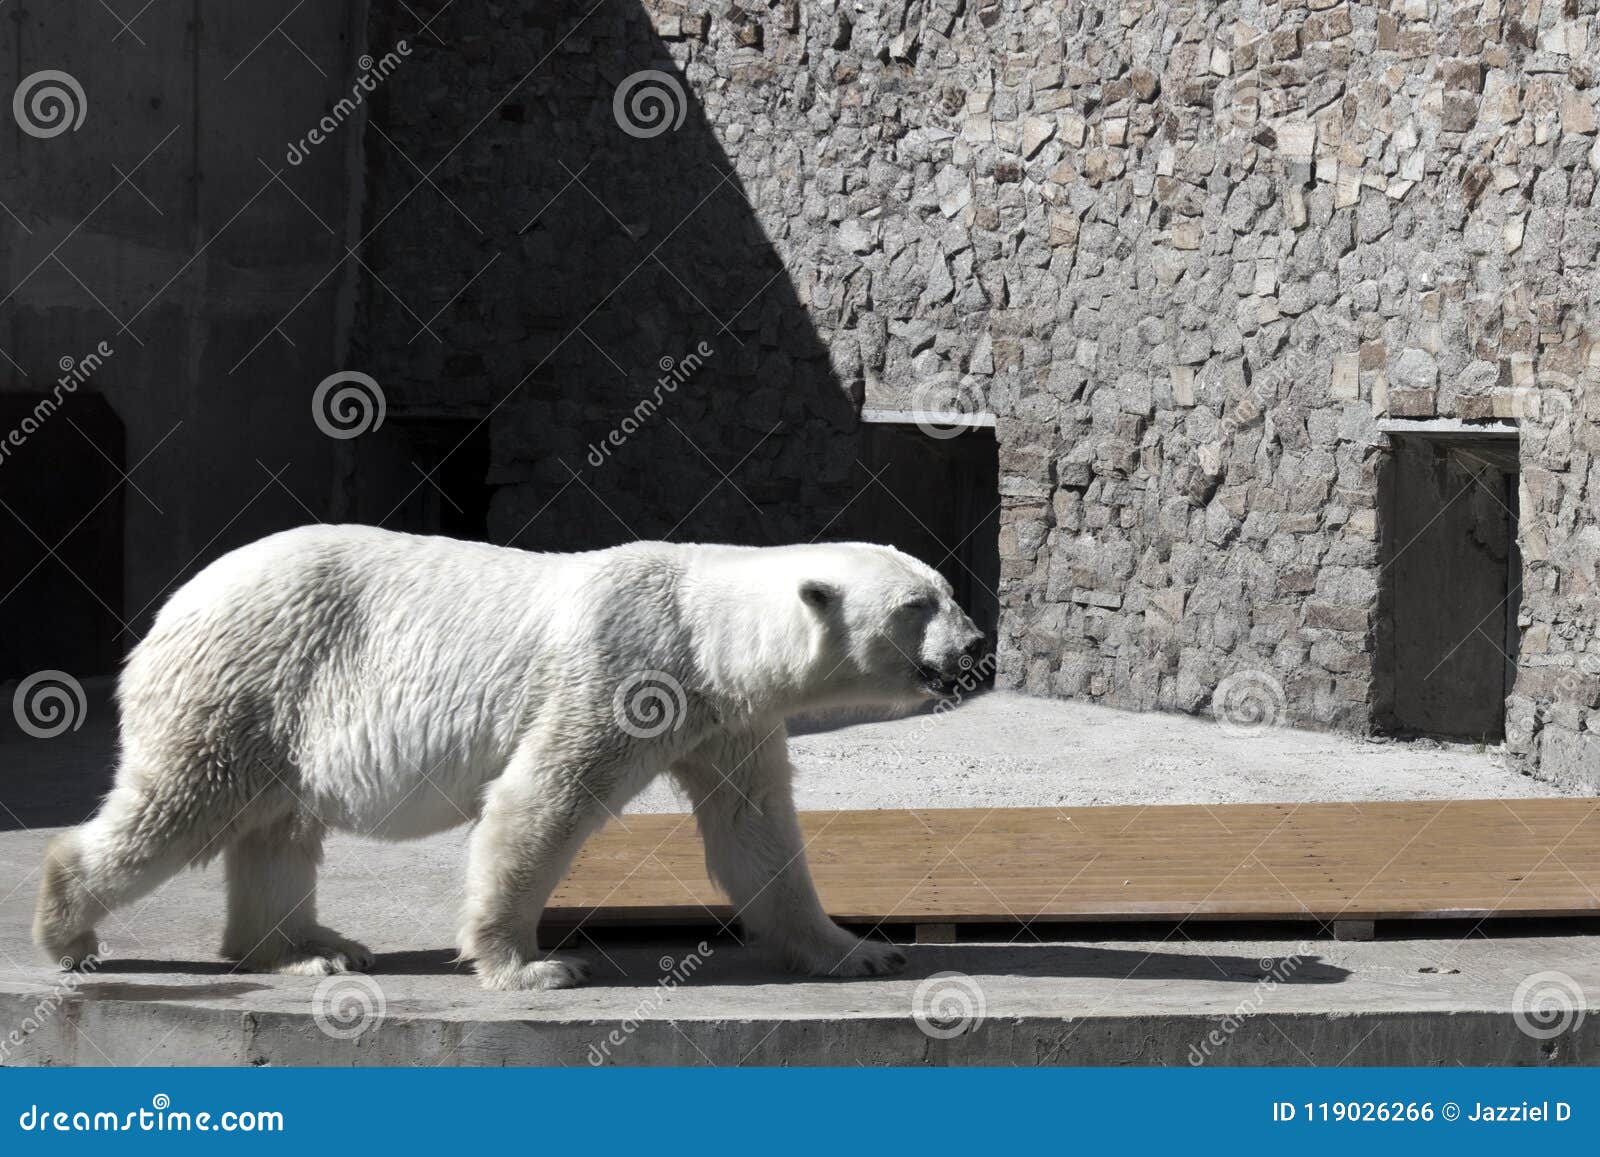 big cute adult white bear walking in a zoo cage